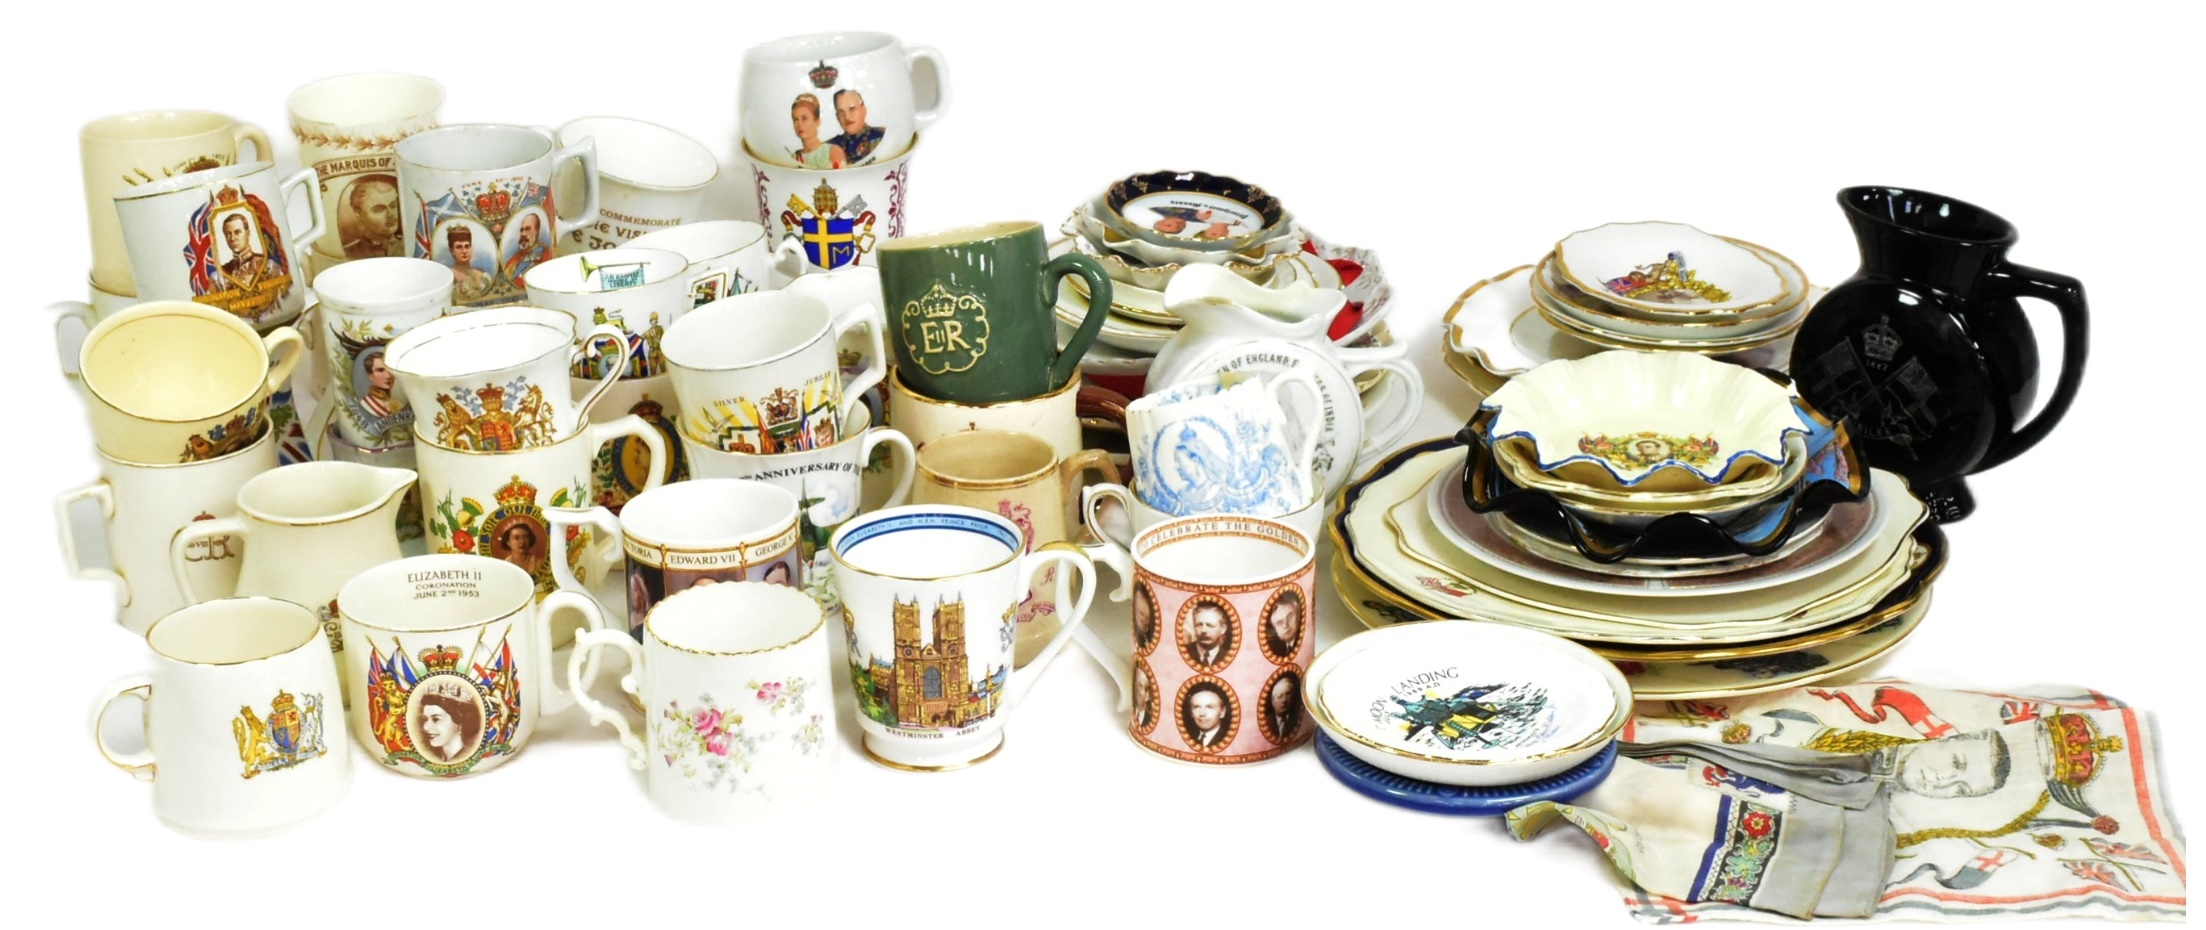 LARGE COLLECTION OF ROYAL COMMEMORATIVE MUGS & PLATES